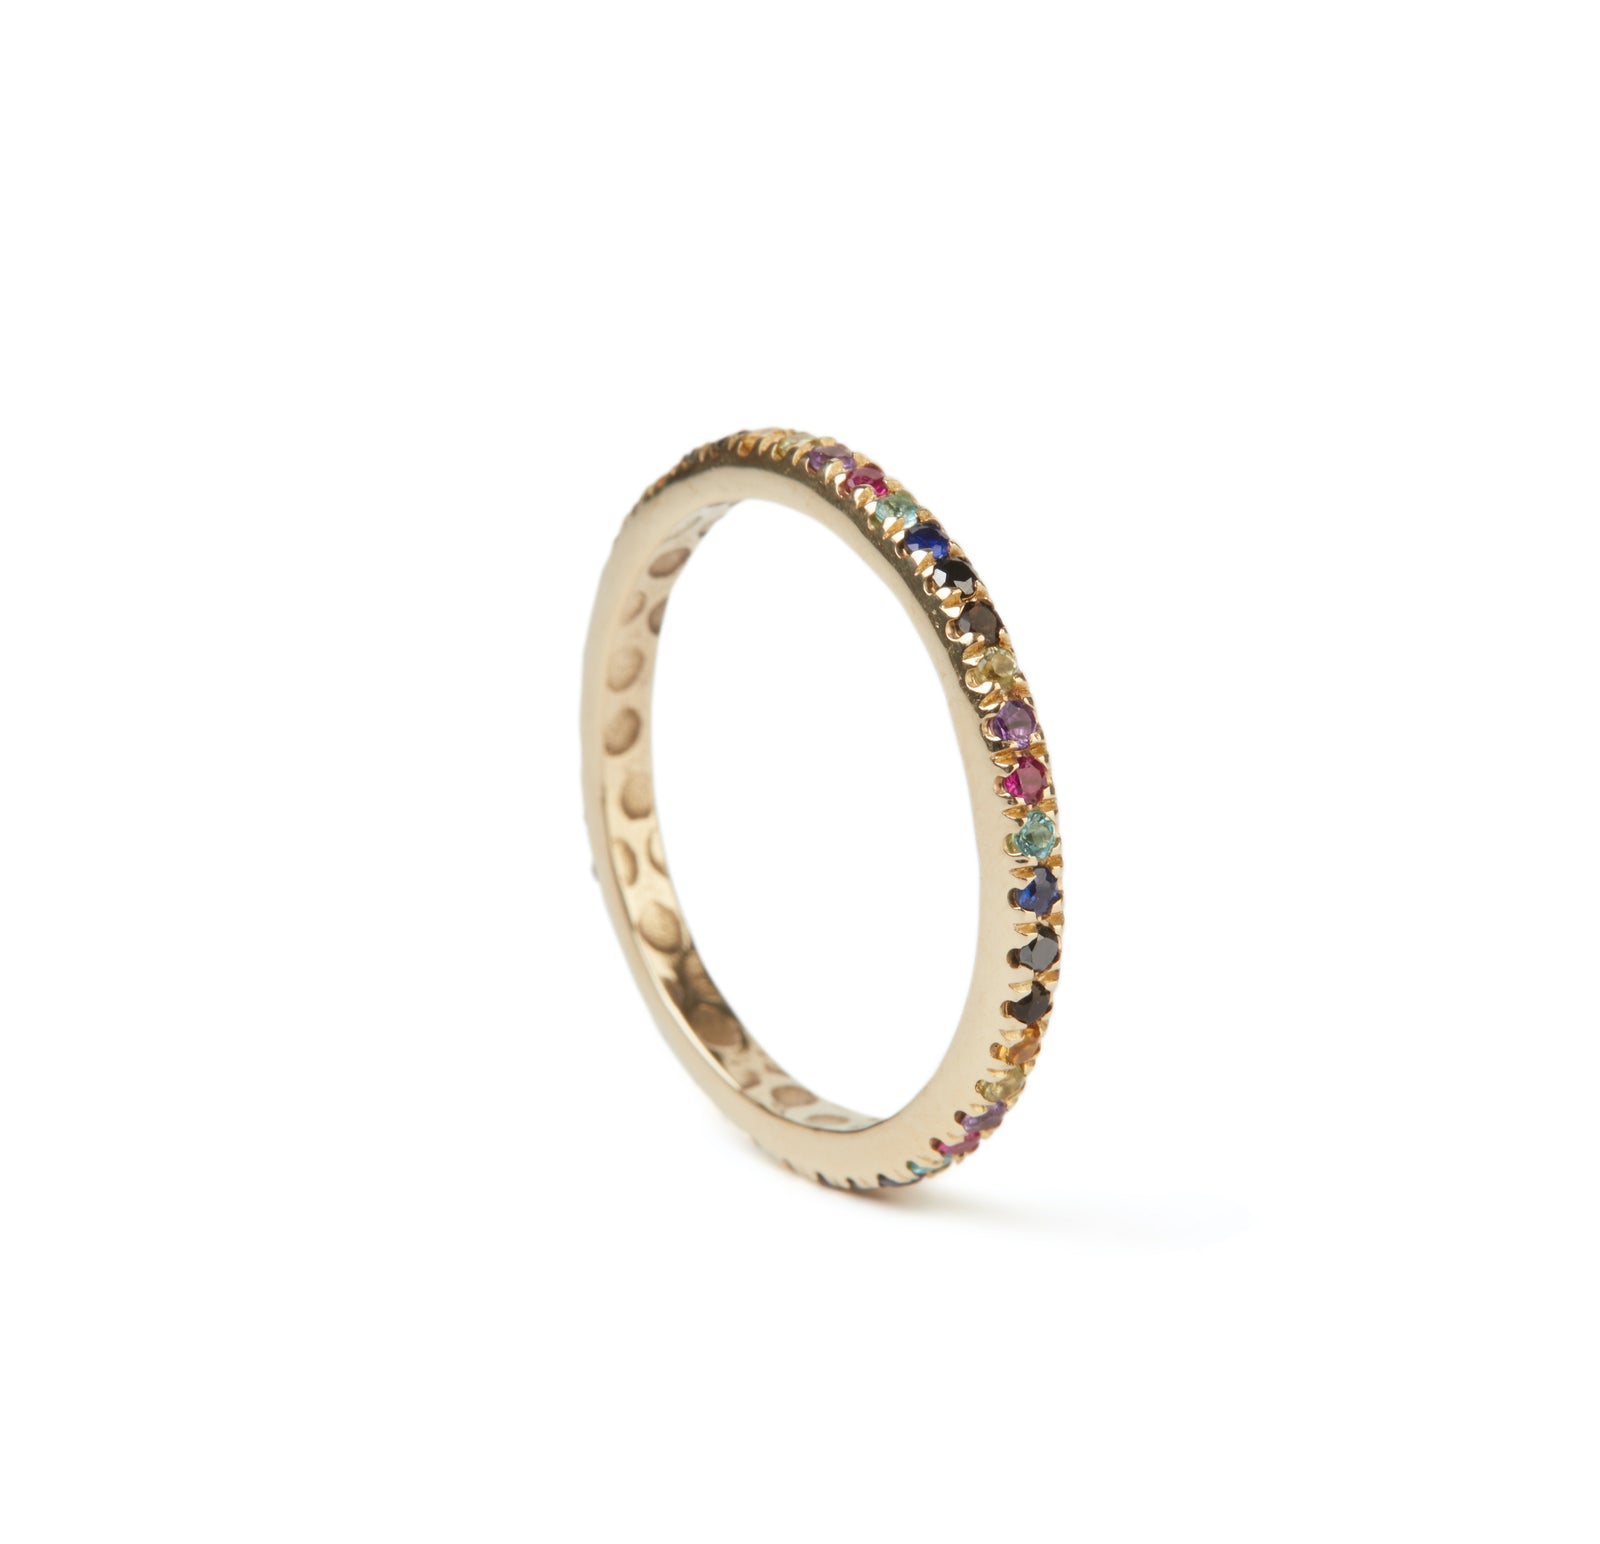 'Mixed Feelings' Faceted Rainbow Eternity Band